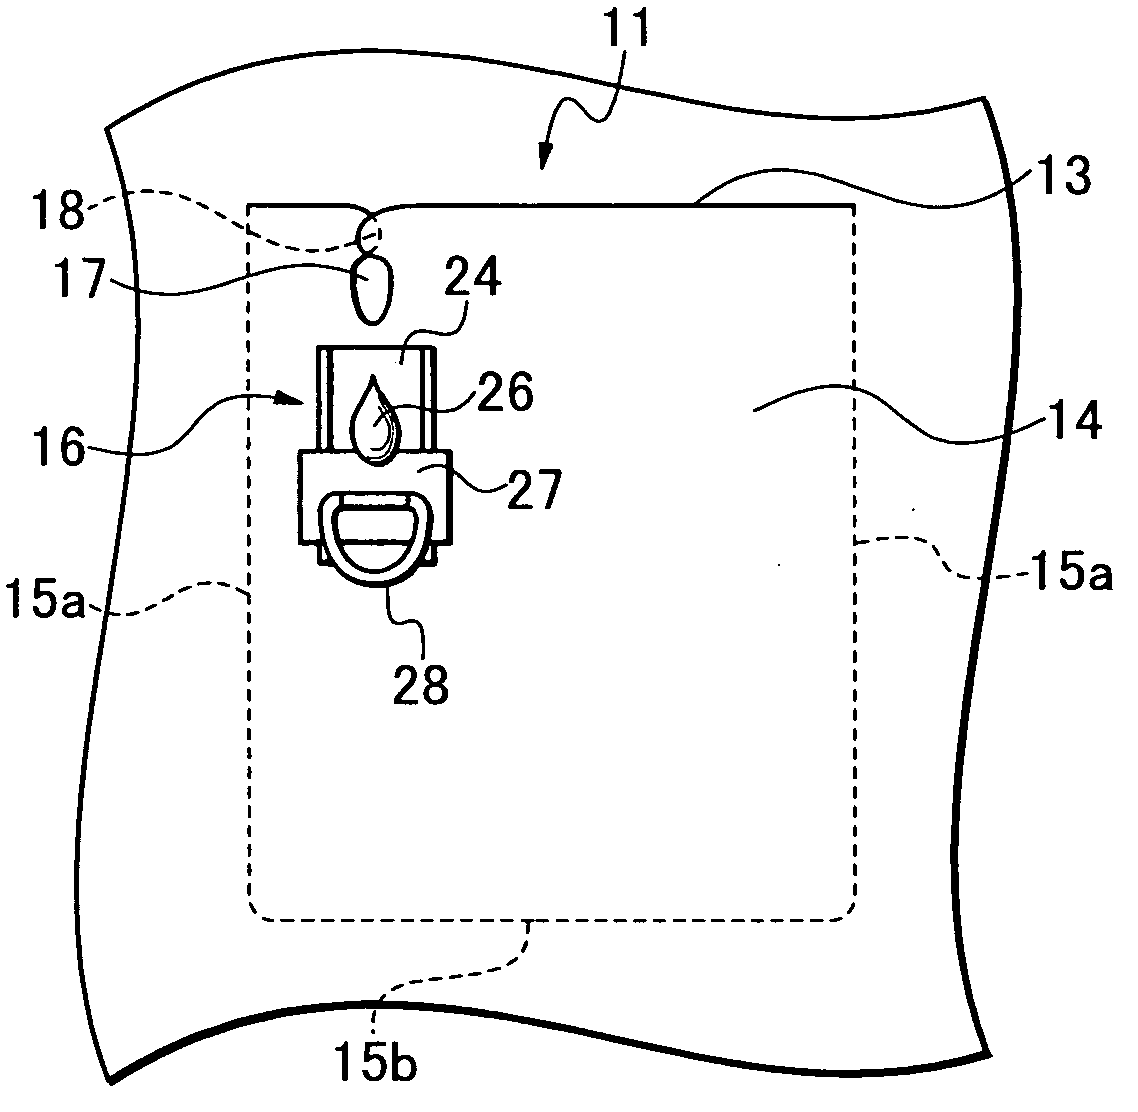 Pocket provided with fastener